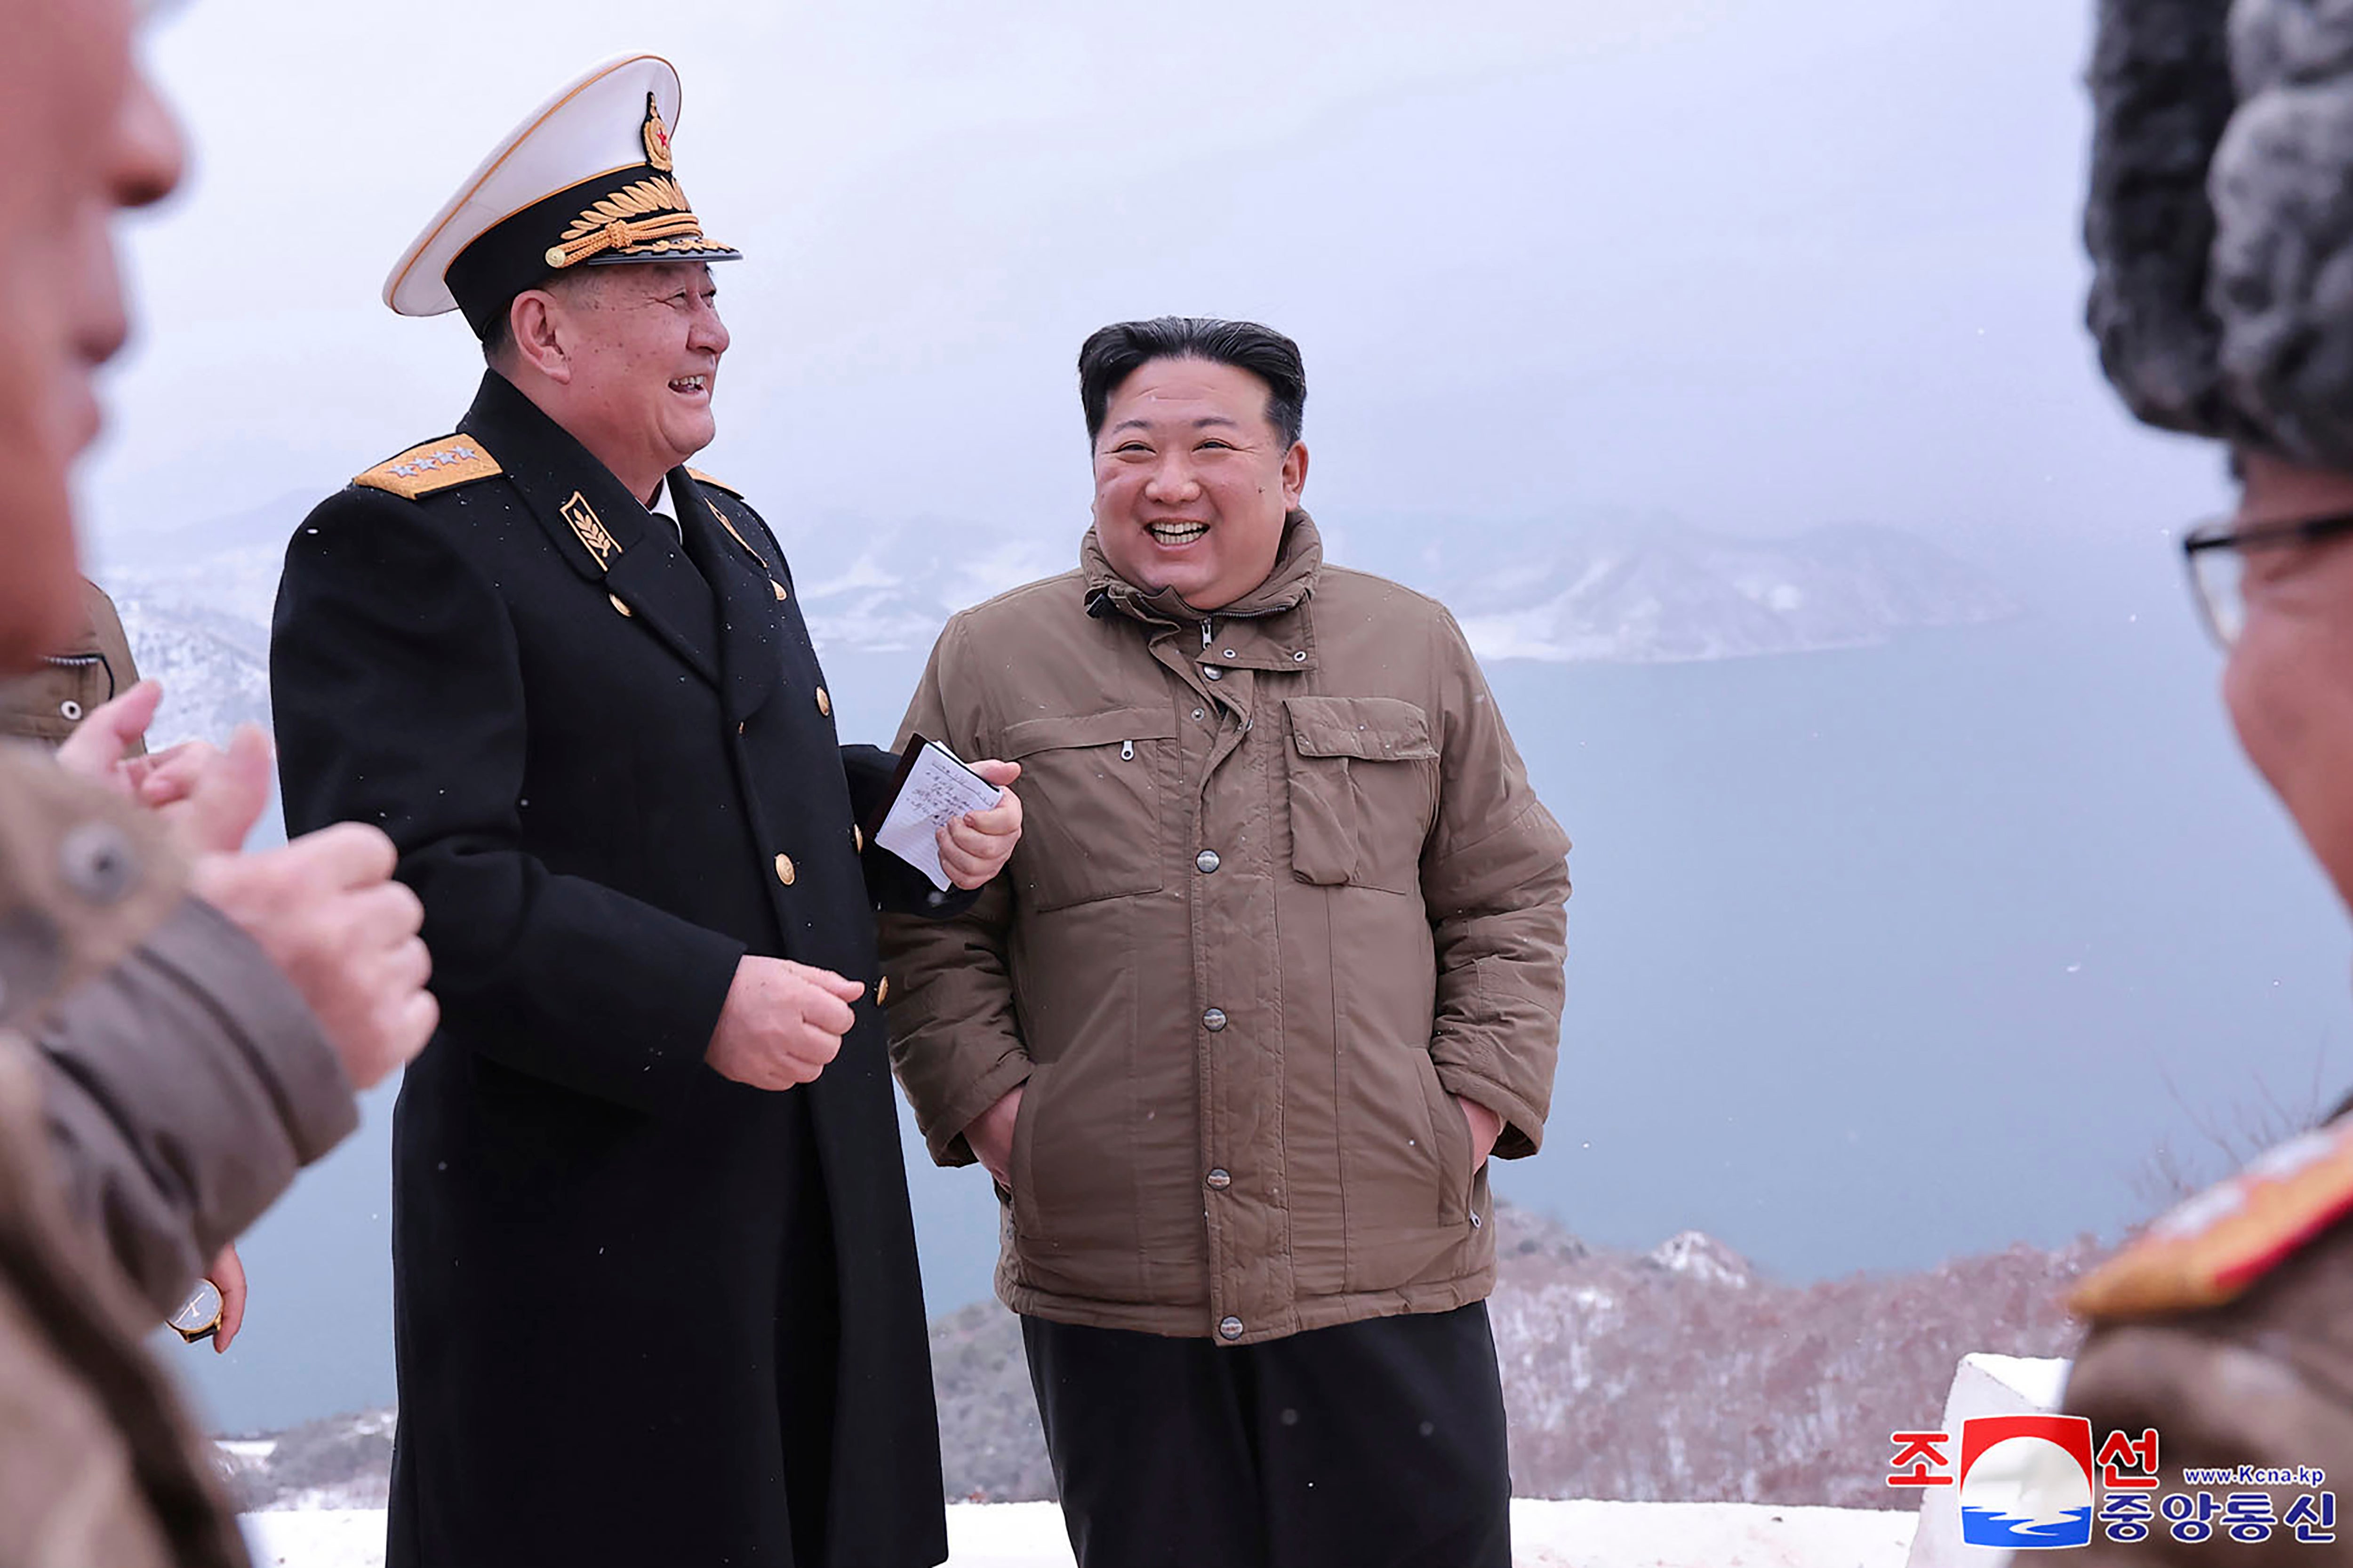 In this photo provided by the North Korean government, North Korean leader Kim Jong Un, right, stands with a North Korean general